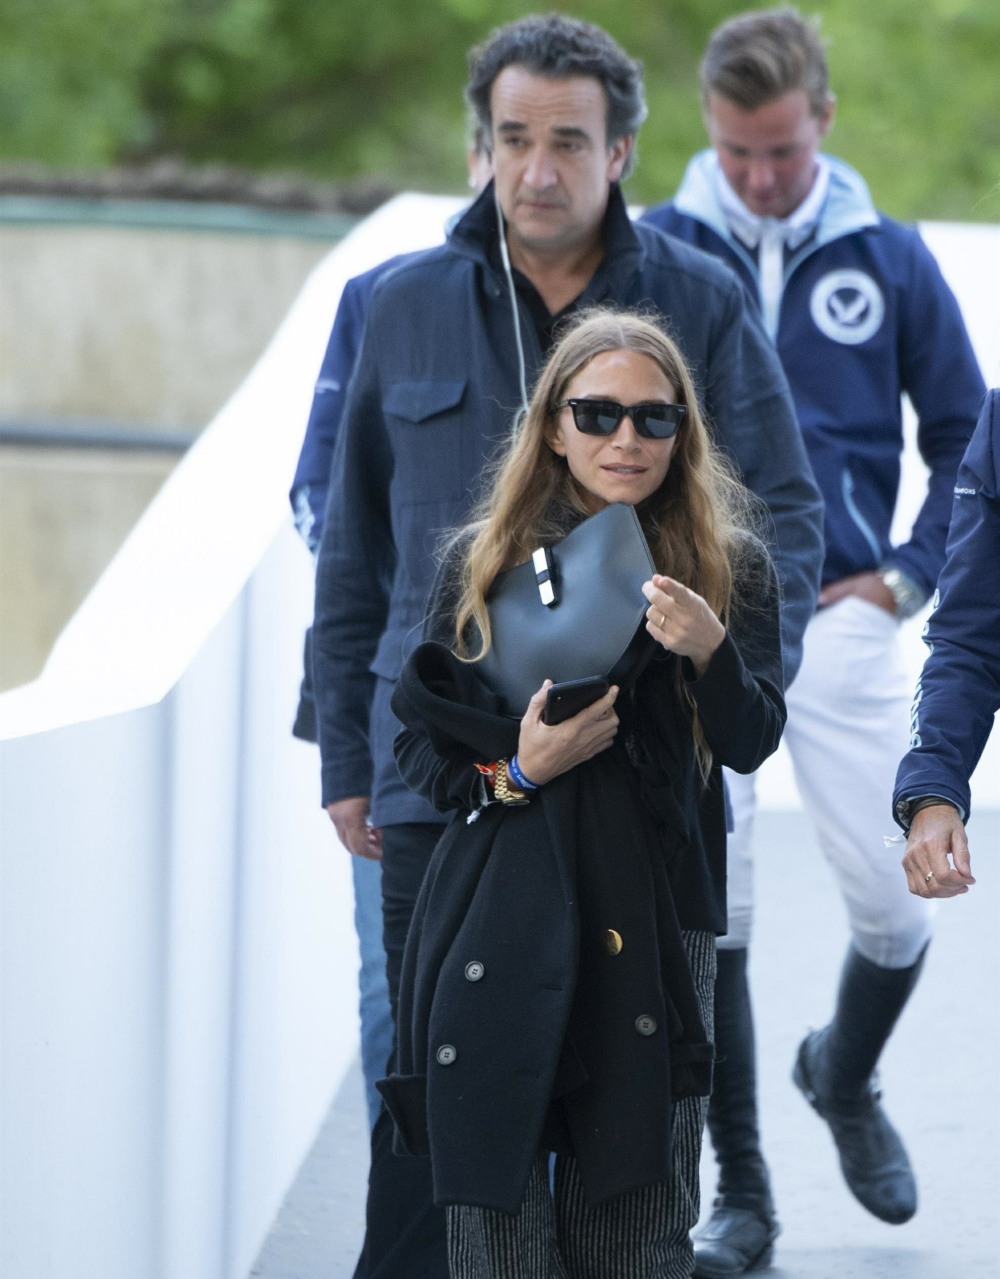 Olivier Sarkozy and his wife Mary-Kate Olsen attend the Global Champions Tour CSI2 Madrid 2019